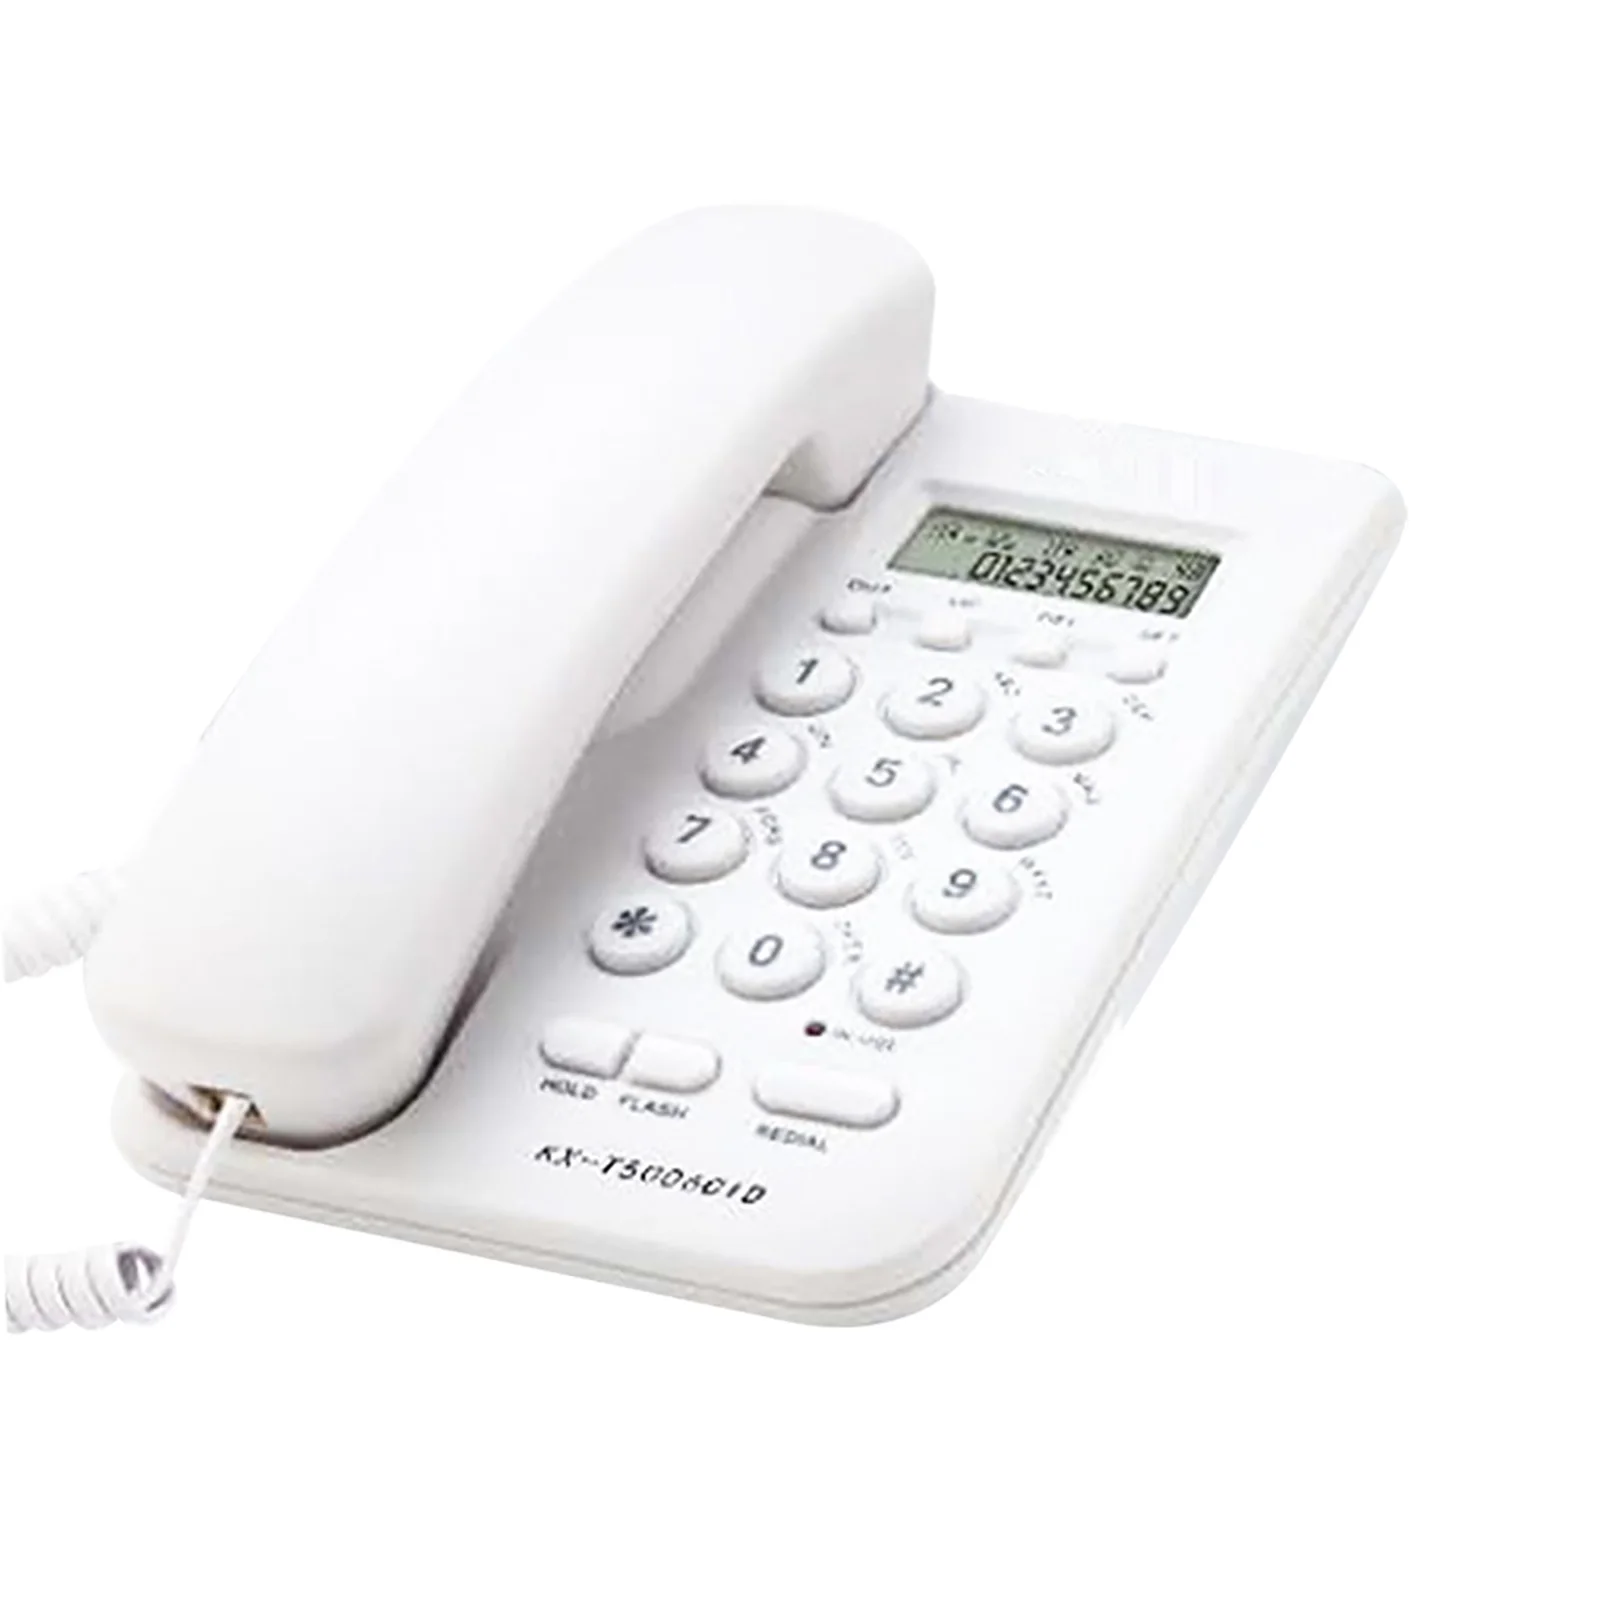 

KX-T5006CID Callback Landline Wall Mounted Business Hotel Caller ID LCD Display Loud Sound FSK DTMF Corded Telephone Home Office